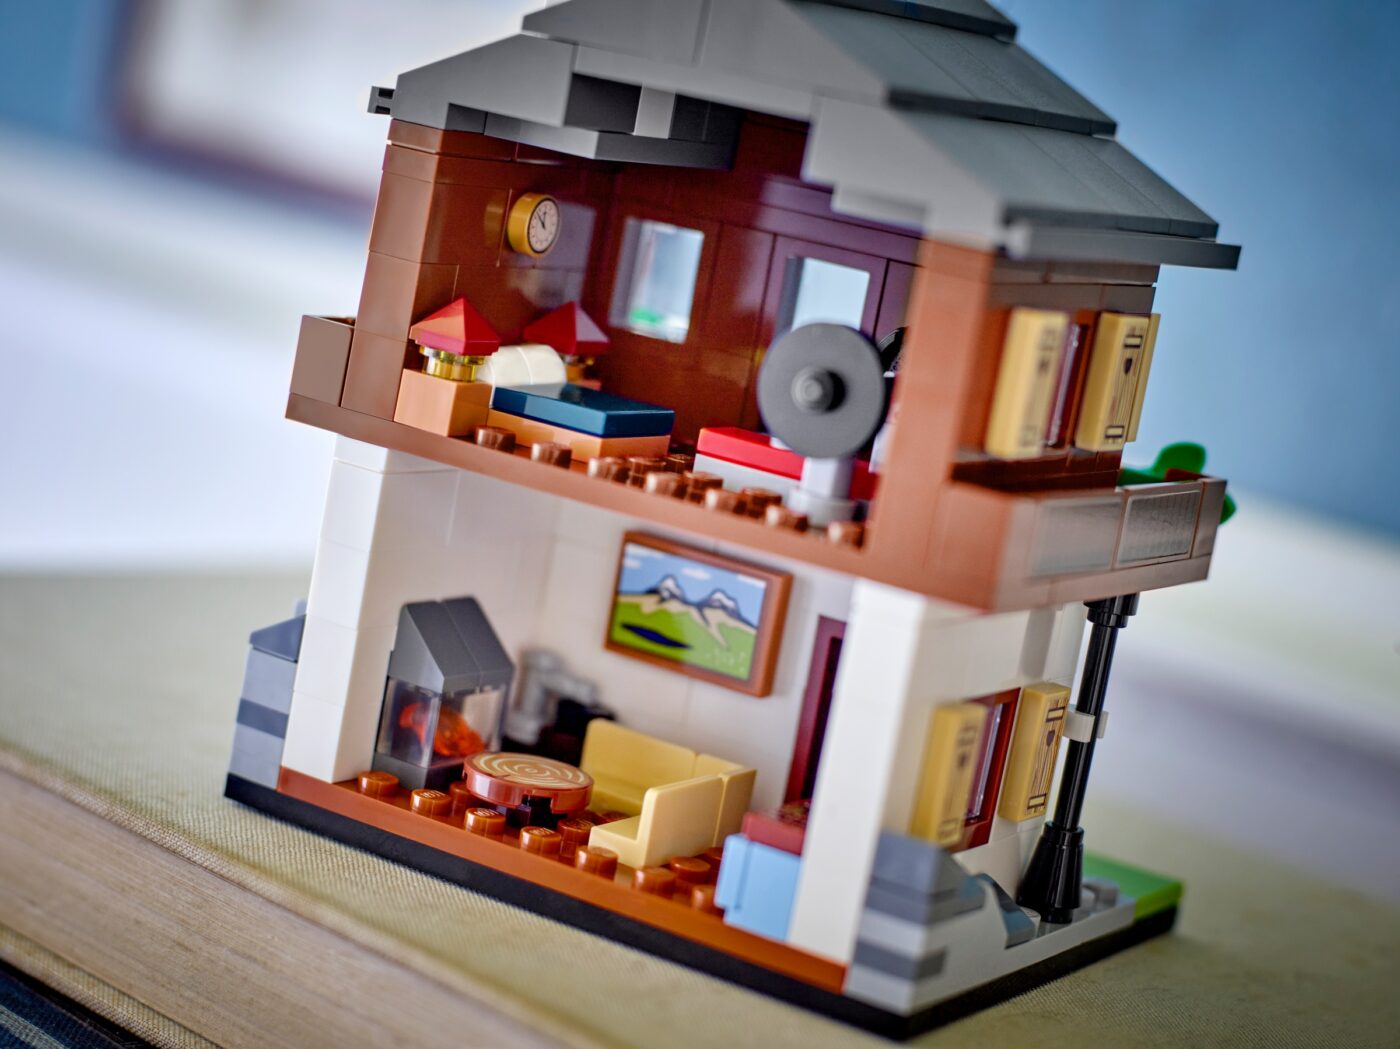 Confirmed: LEGO Houses of the World 3 gift with purchase (GWP) is available from 11 August13